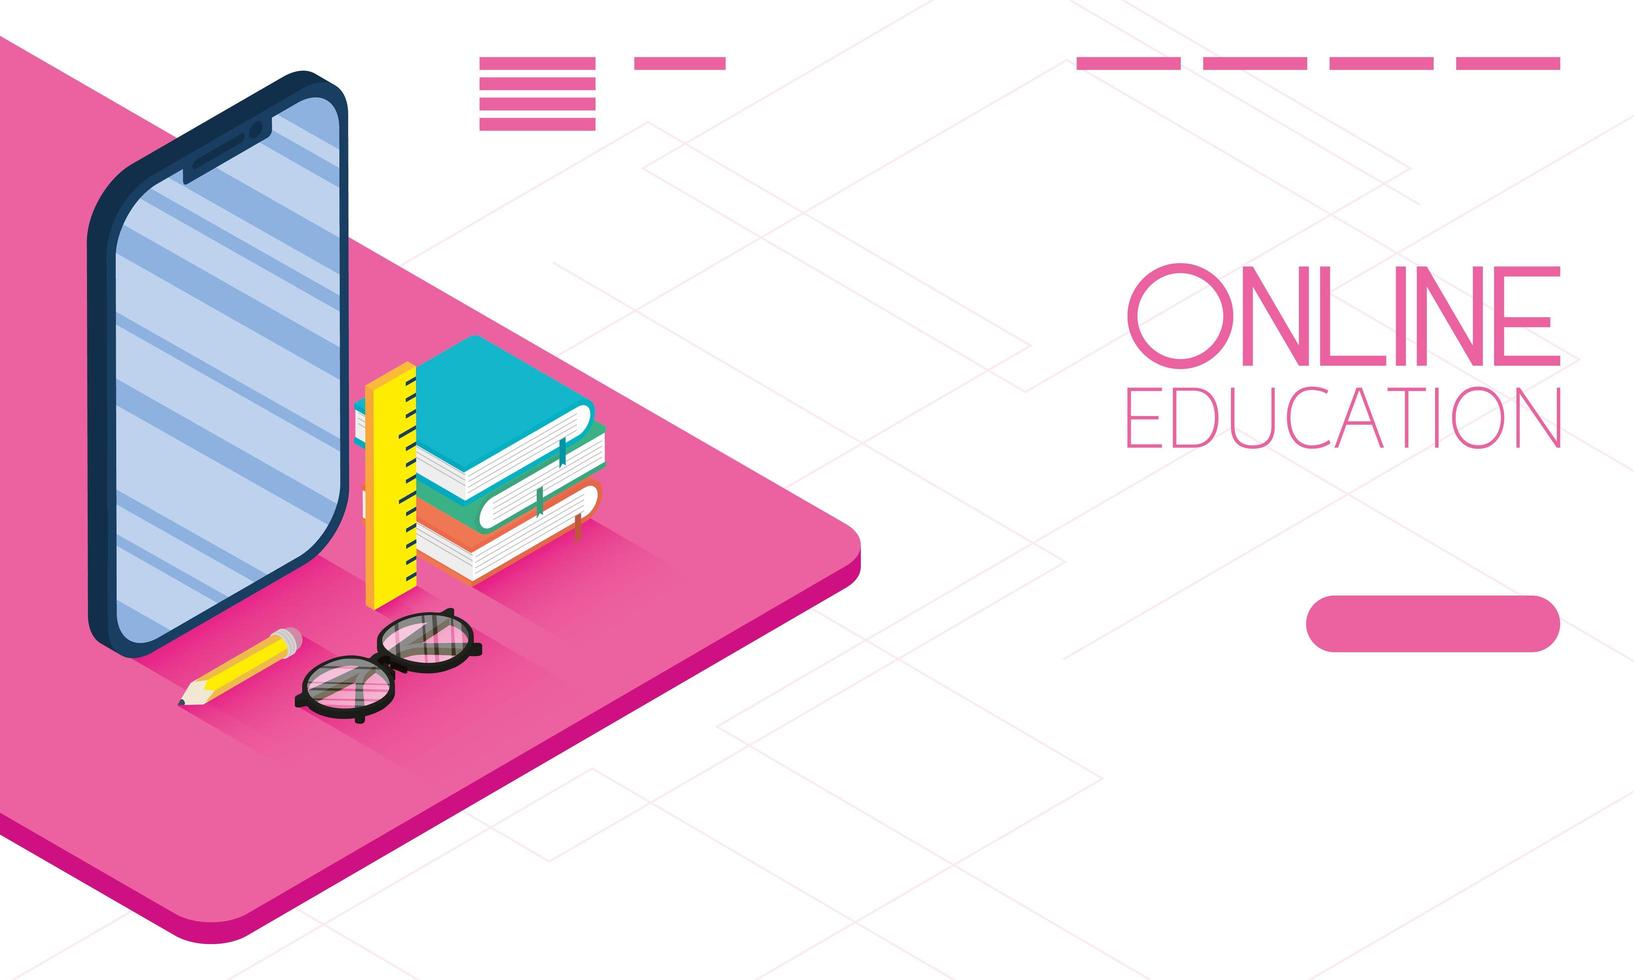 Online education and e-learning banner with smartphone vector